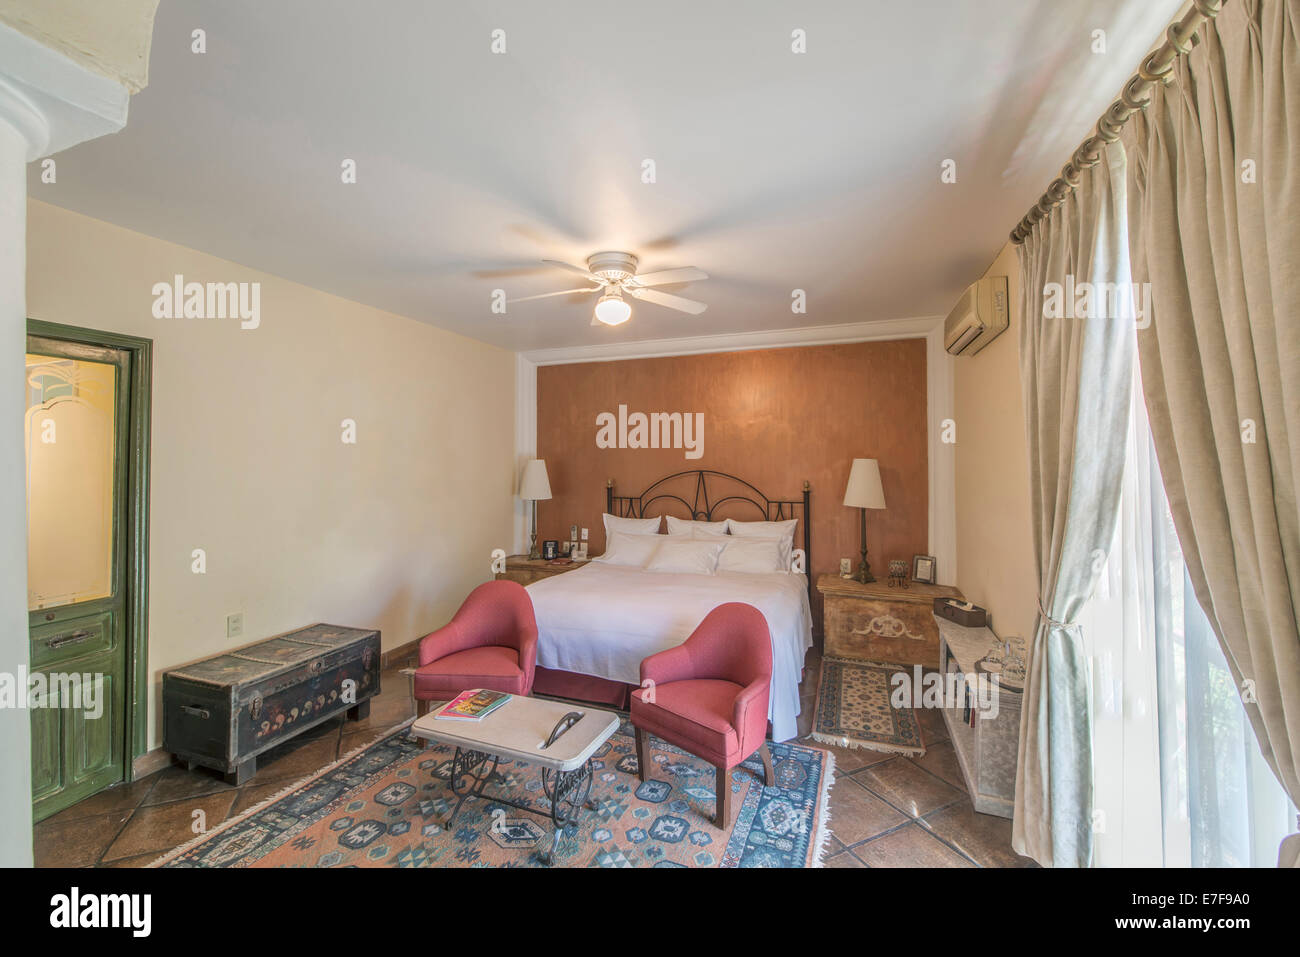 Bed, chairs and trunks in traditional hotel room Stock Photo